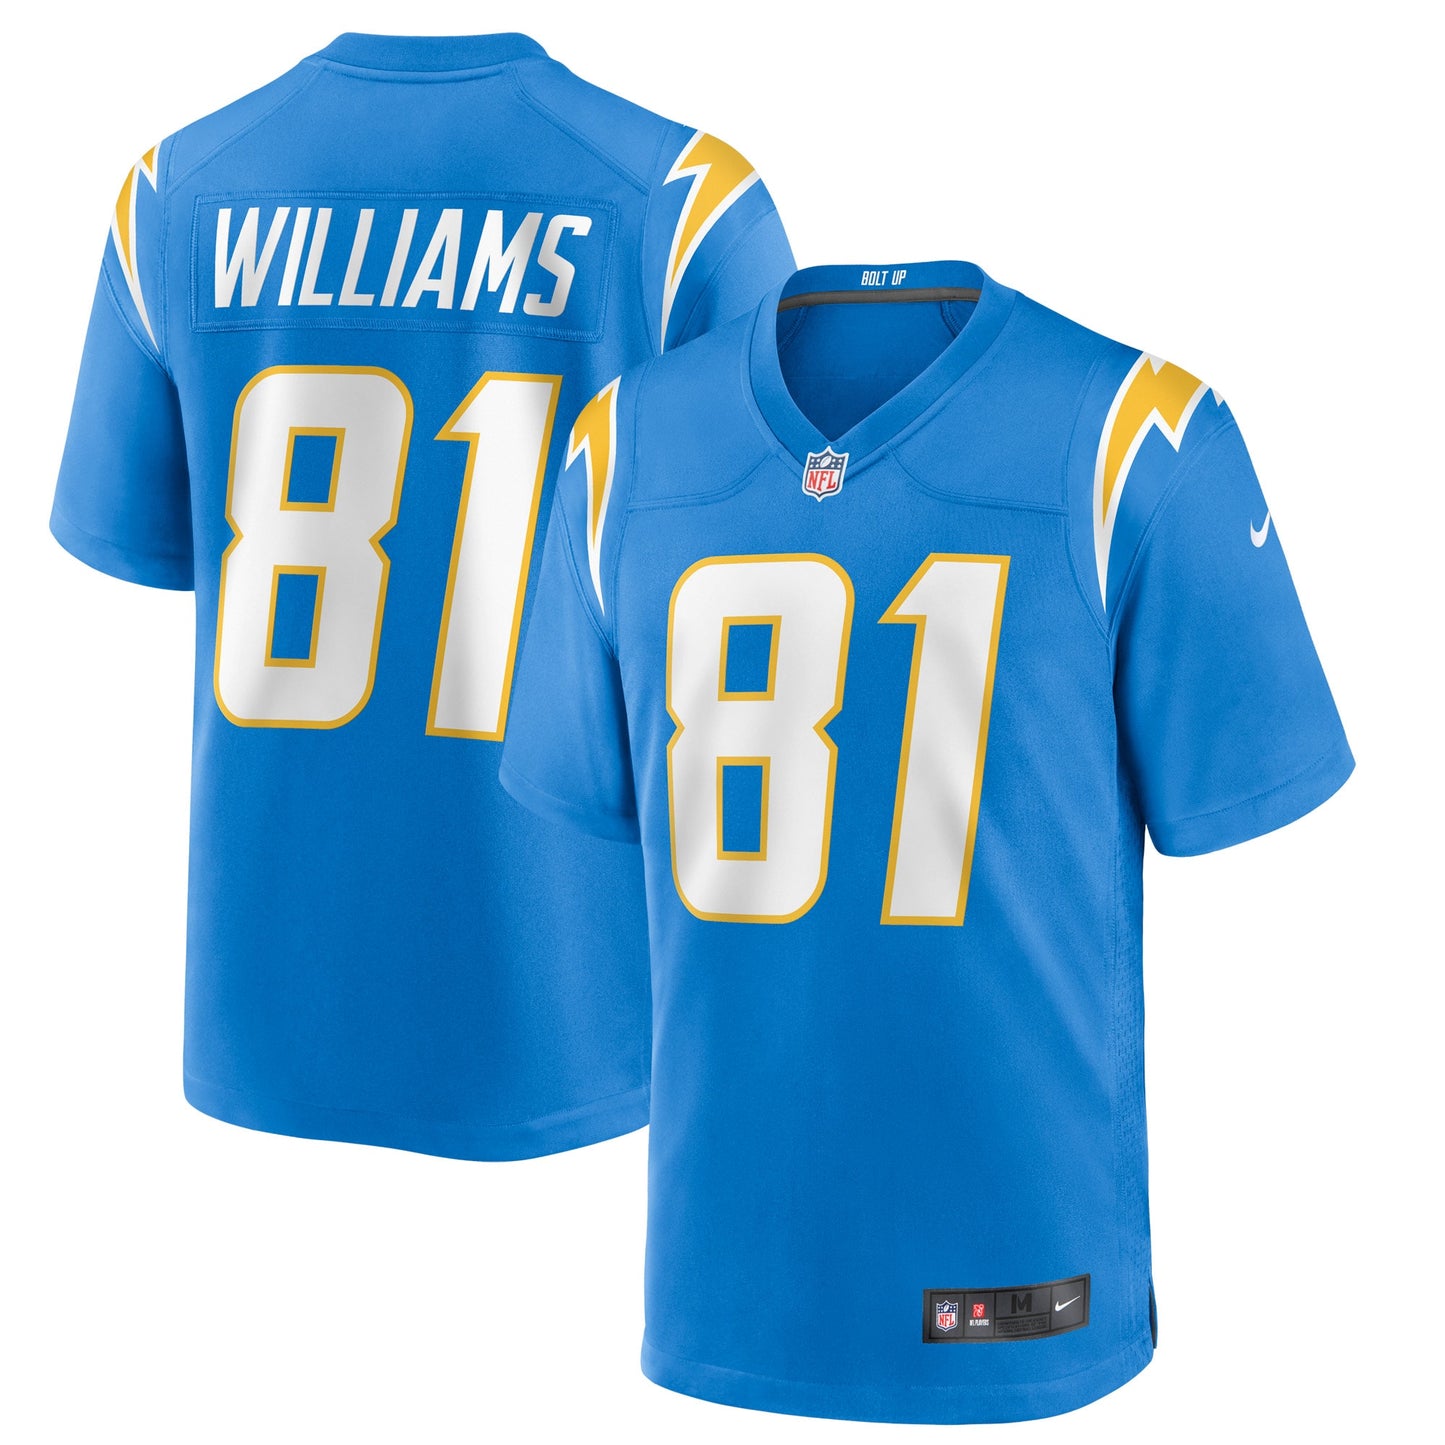 Mike Williams Los Angeles Chargers Nike Game Jersey - Powder Blue